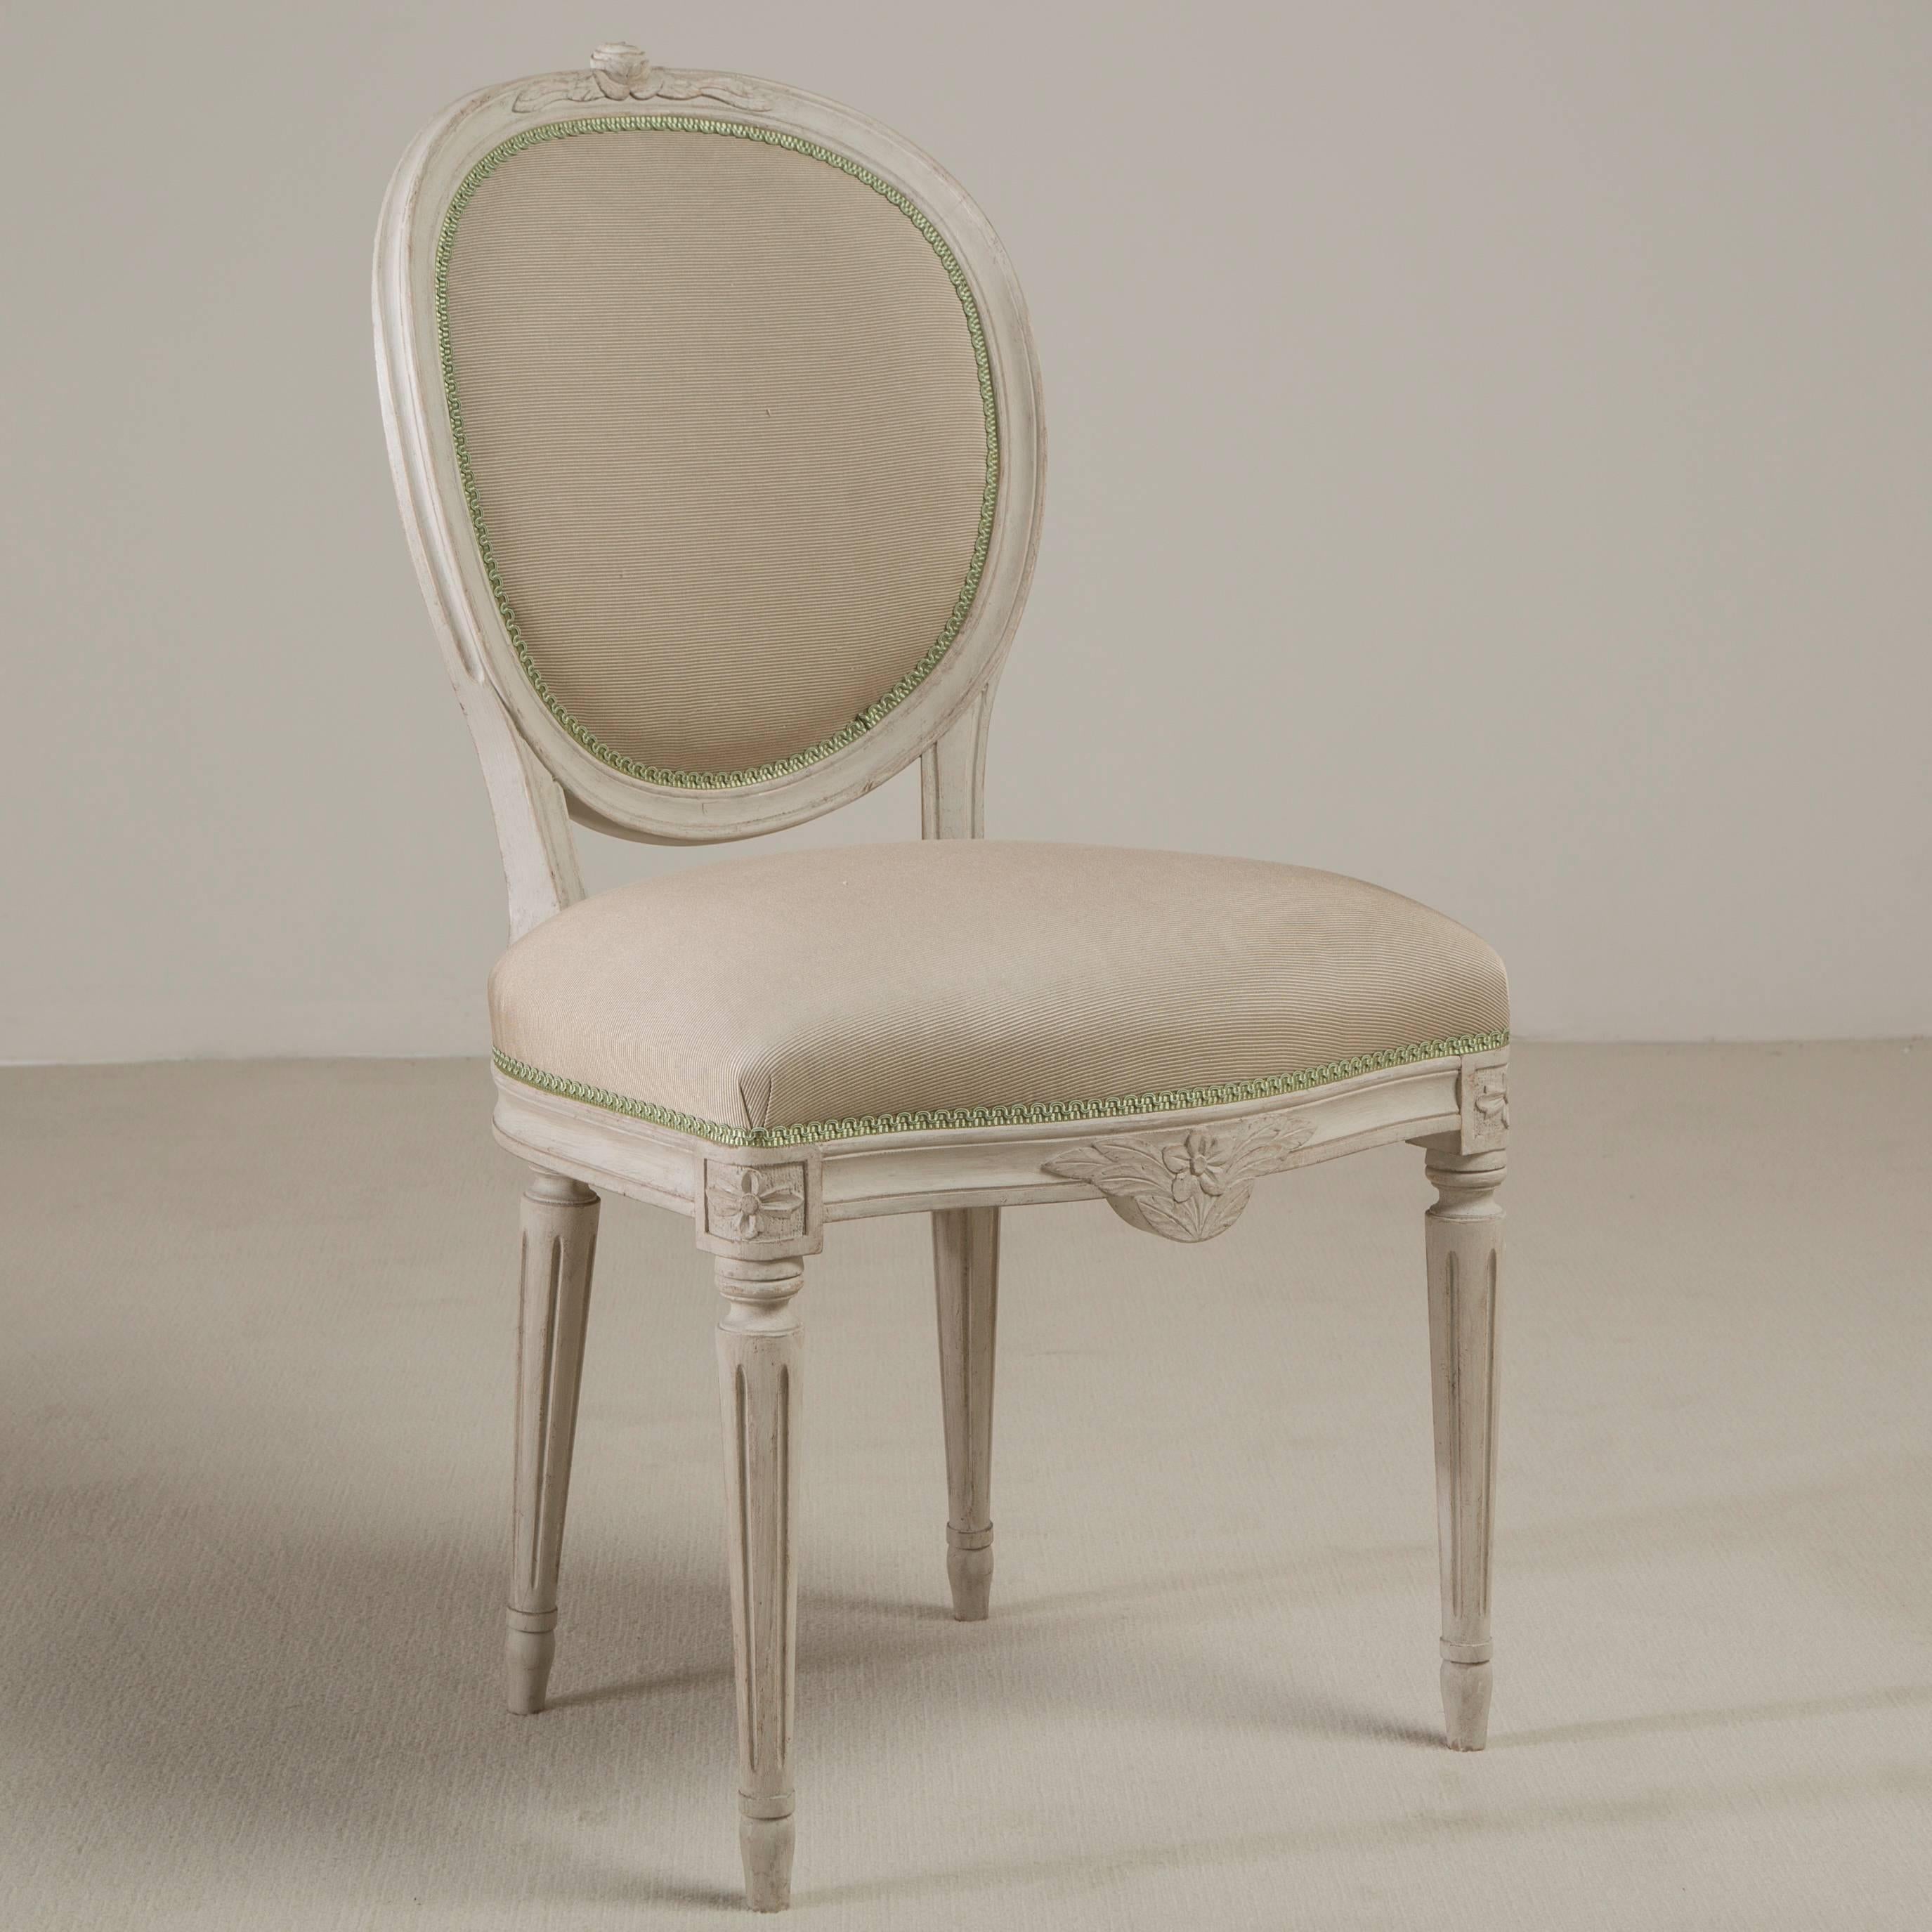 A set of six Swedish Medalion chairs reupholstered by Talisman, circa 1880.